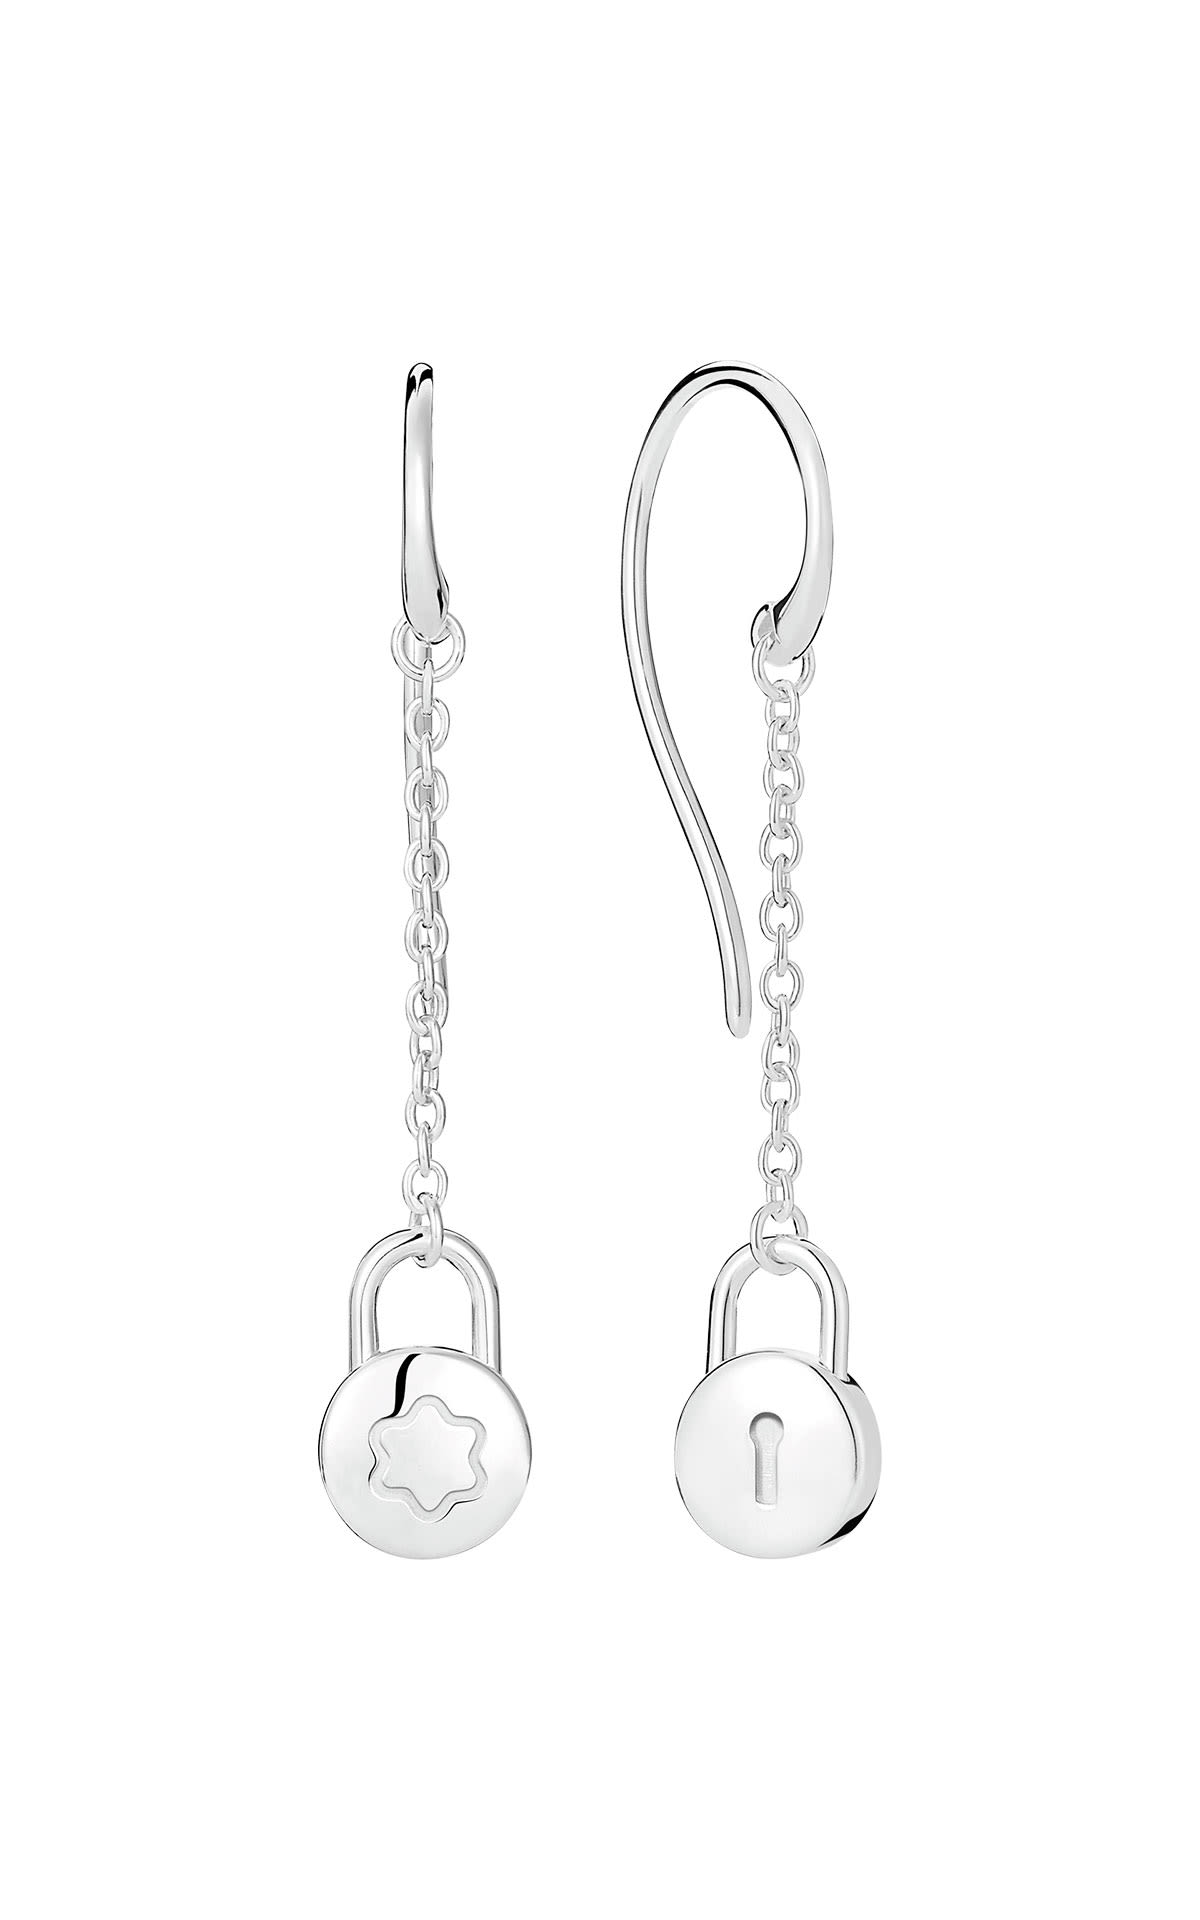 Always Together earrings in silver Montblanc